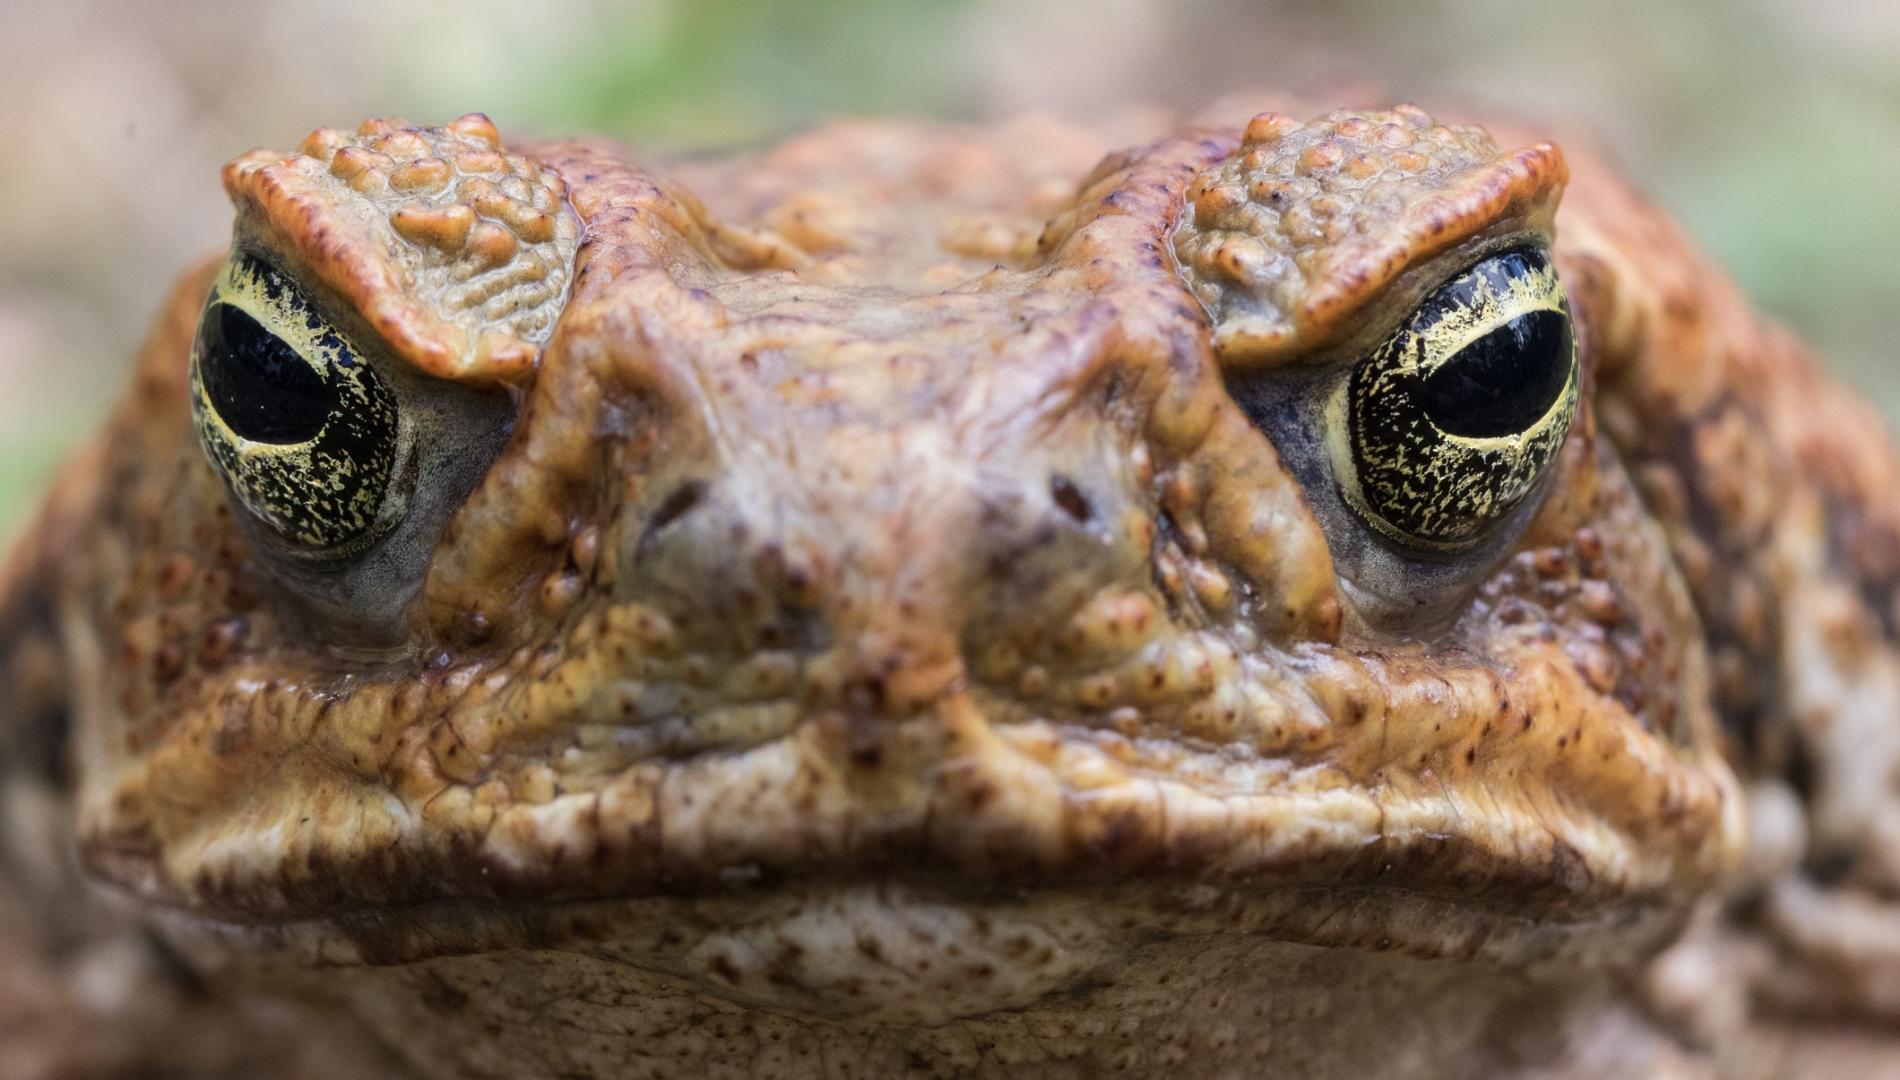 Cane or Marine Toad from Australia